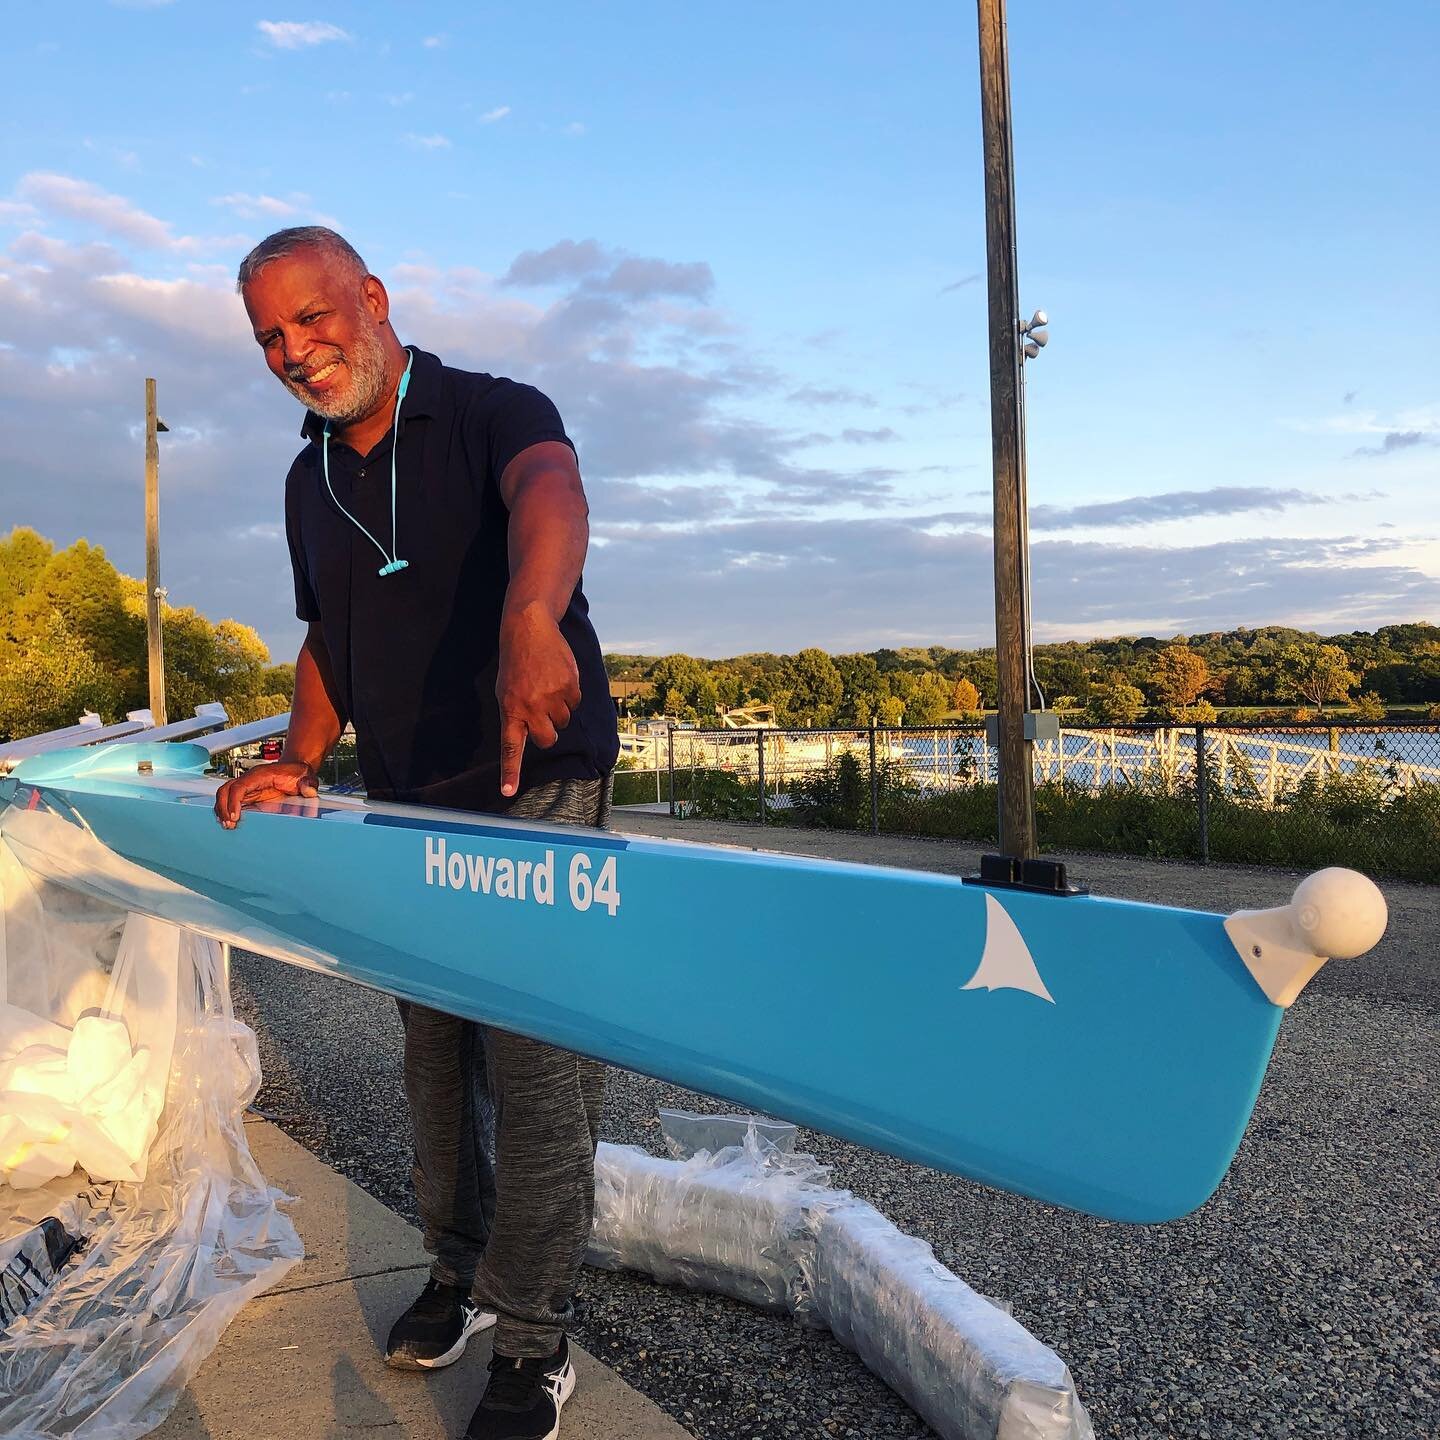 Congrats @crewcoachpatrick and @athleteswithoutlimits on being the recipient of this new @beashark straight 4x from @amostbeautifulthing inclusion fund! Can&rsquo;t wait to see your crews training and racing in this beauty!